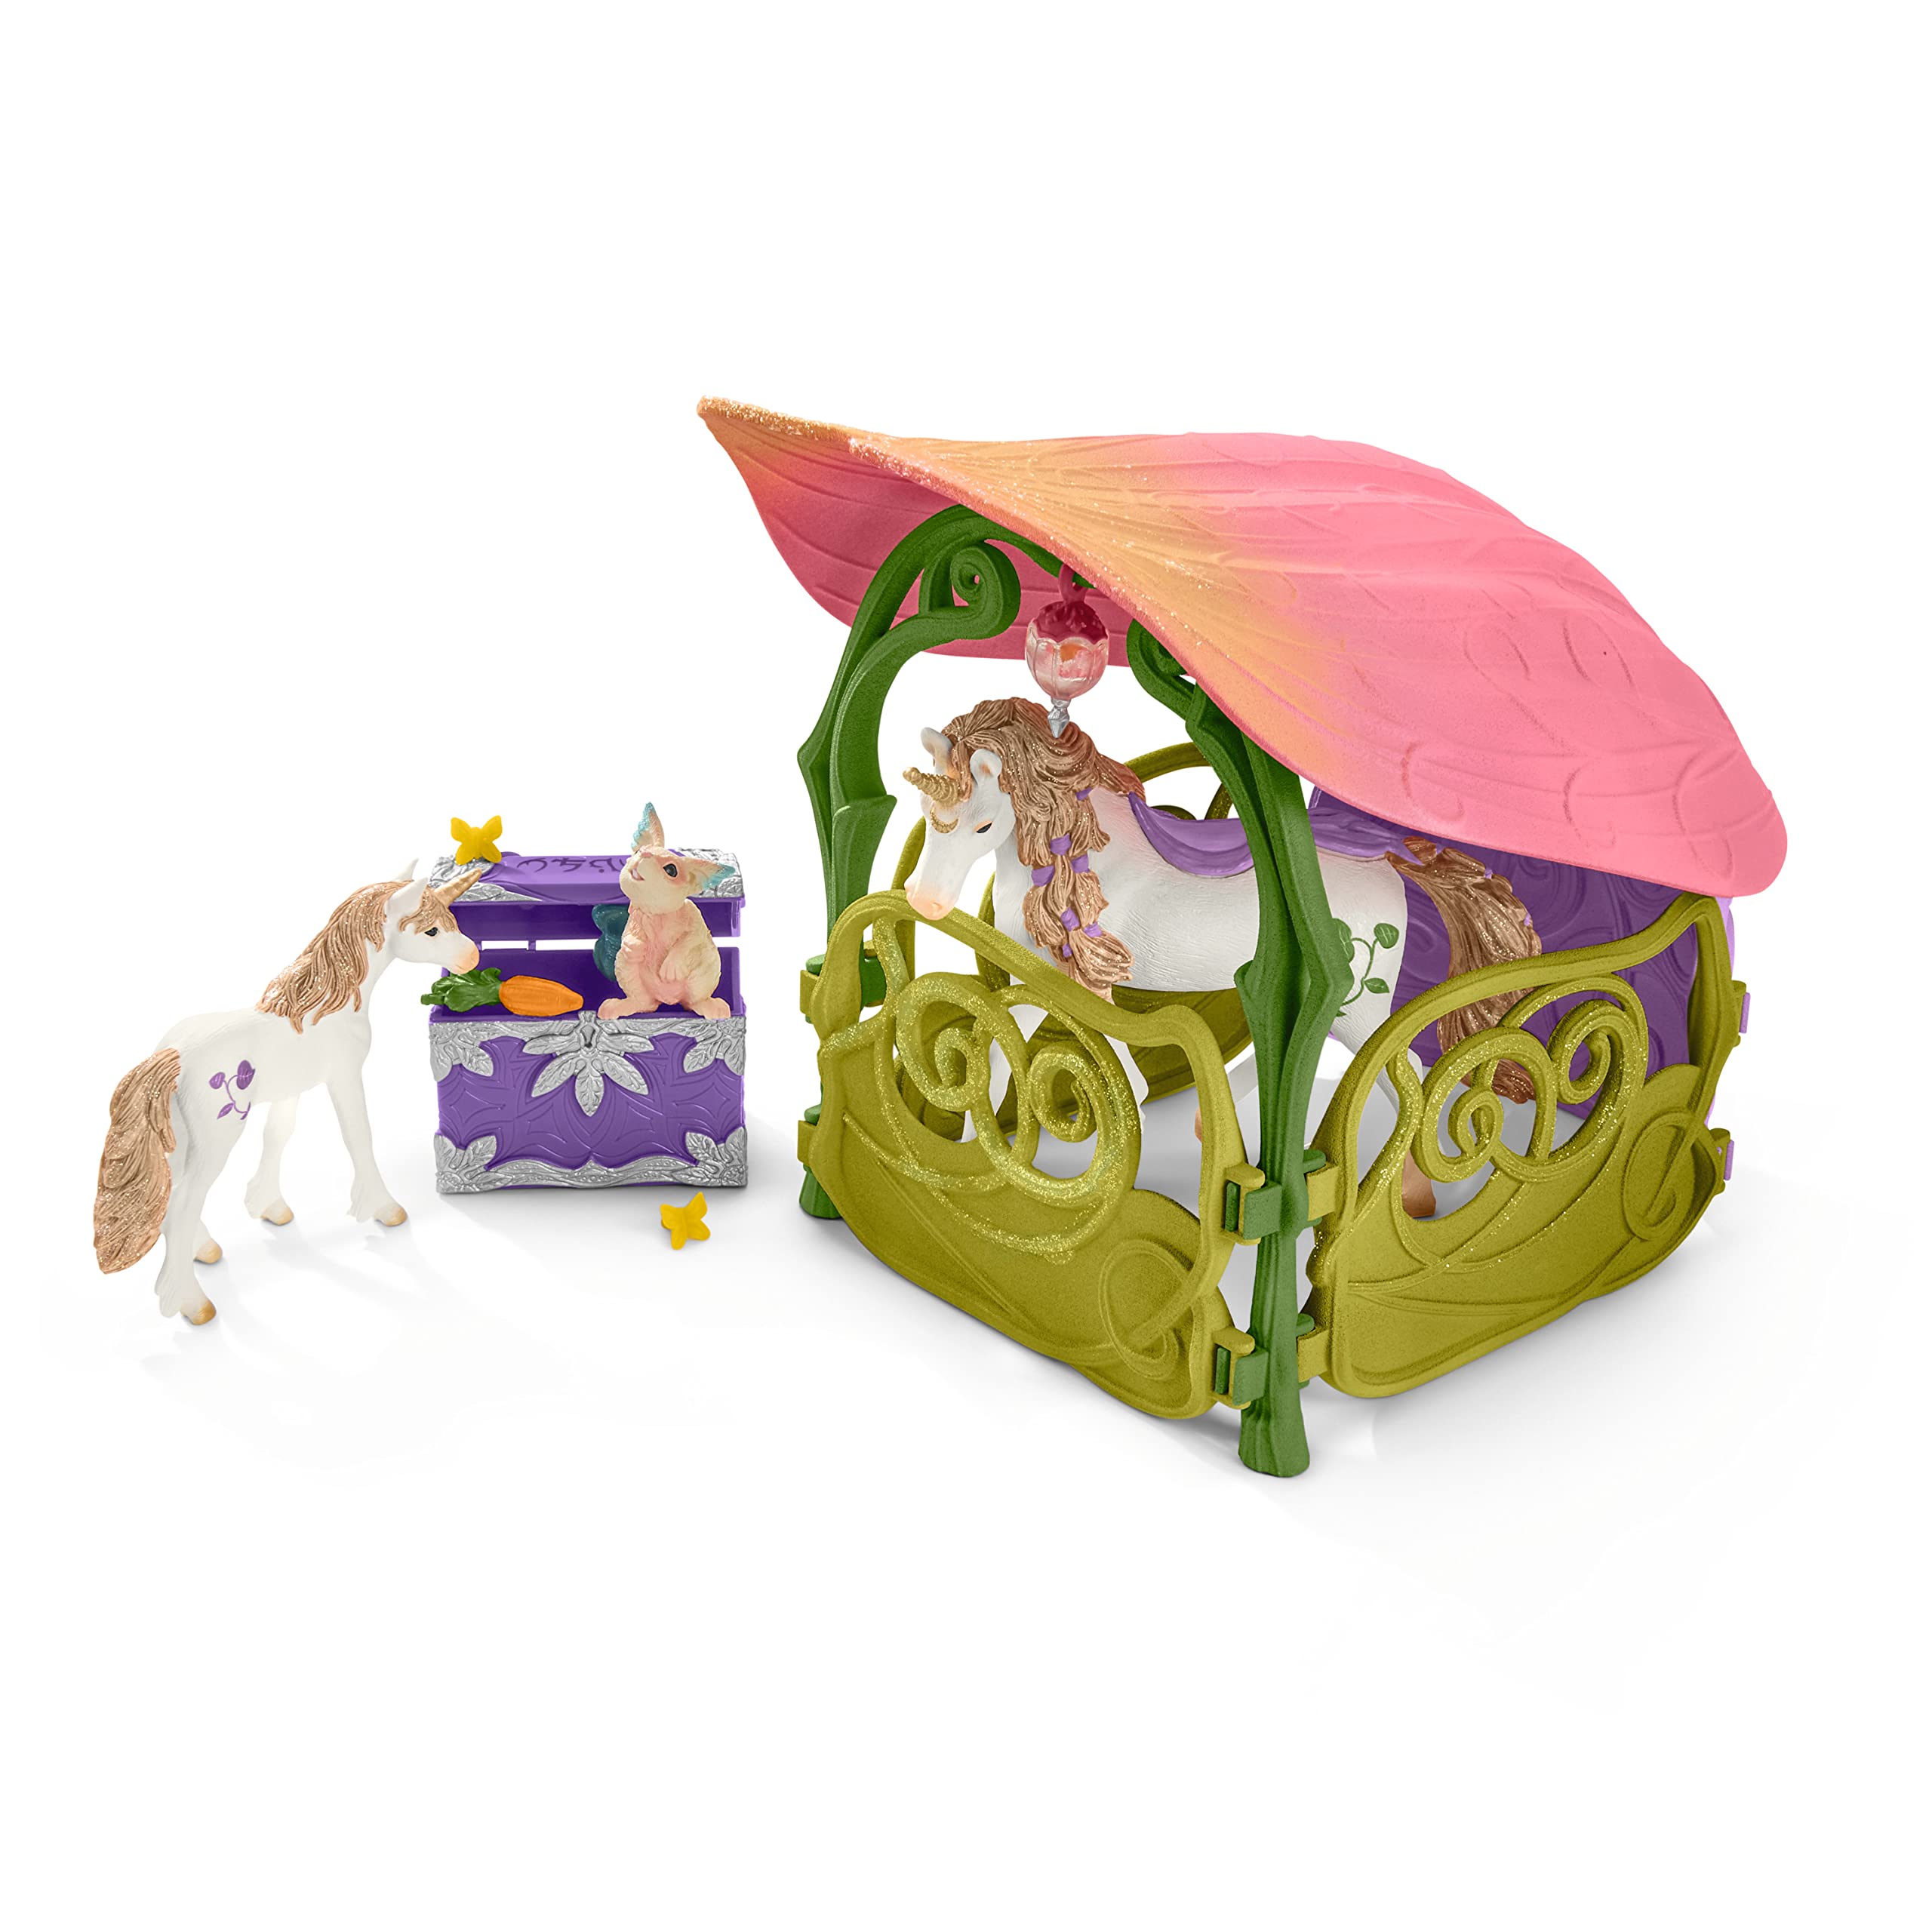 Schleich bayala, Fairy and Unicorn Gifts for Girls and Boys, Glittering Flower Dollhouse with Fairy, Unicorn, and Accessories, Ages 5+